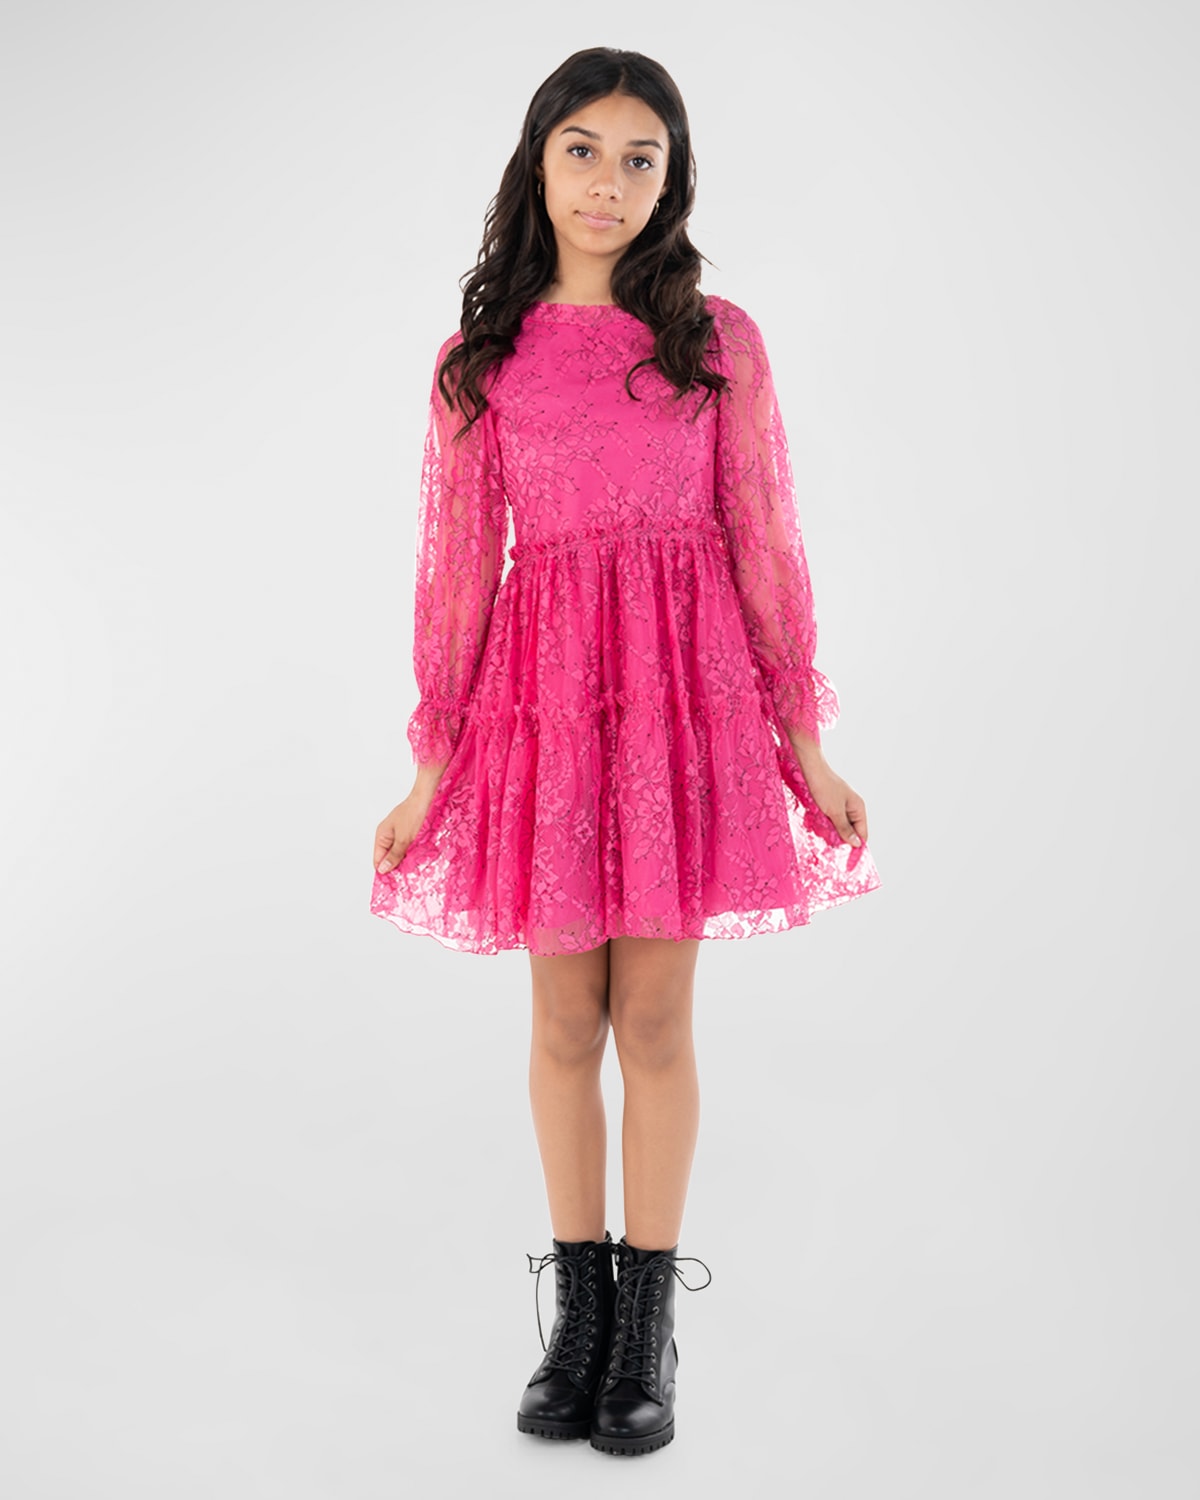 Zoe Kids' Girl's Jordana Lace Floral Layered Dress In Pink